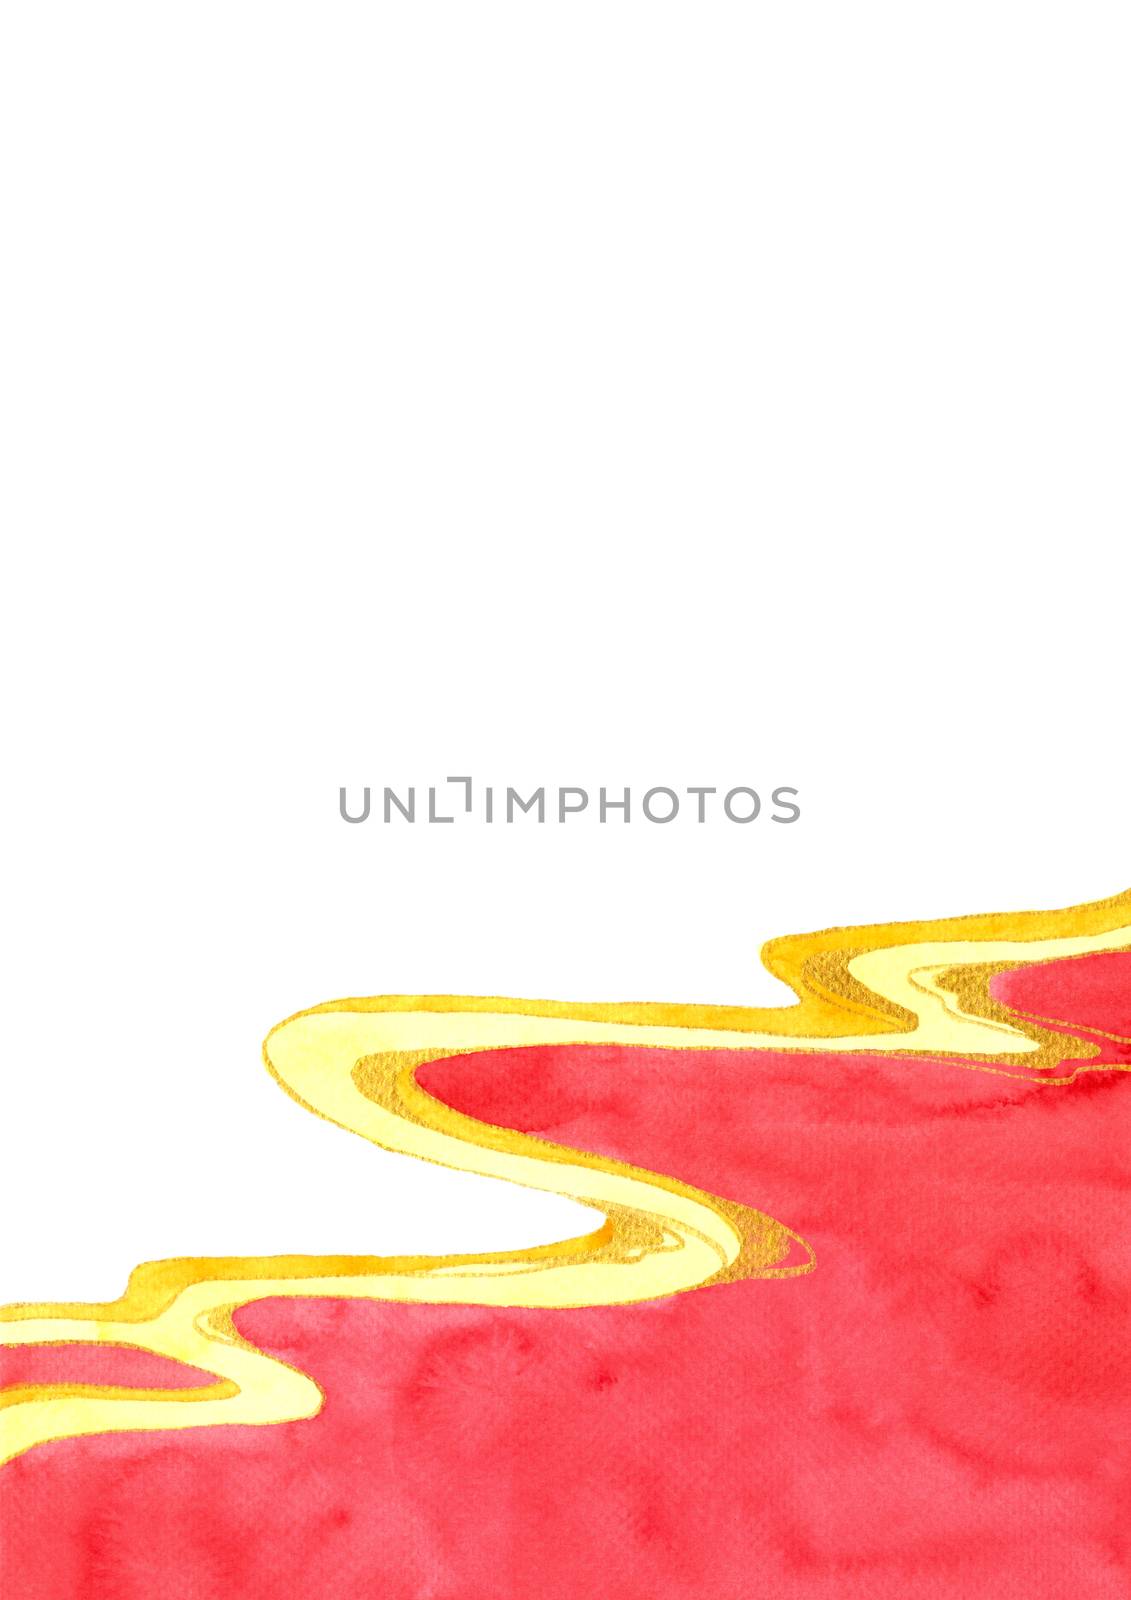 Red and gold Chinese style frame on white background. Watercolor hand painting. Design element for poster, flyer, banner.